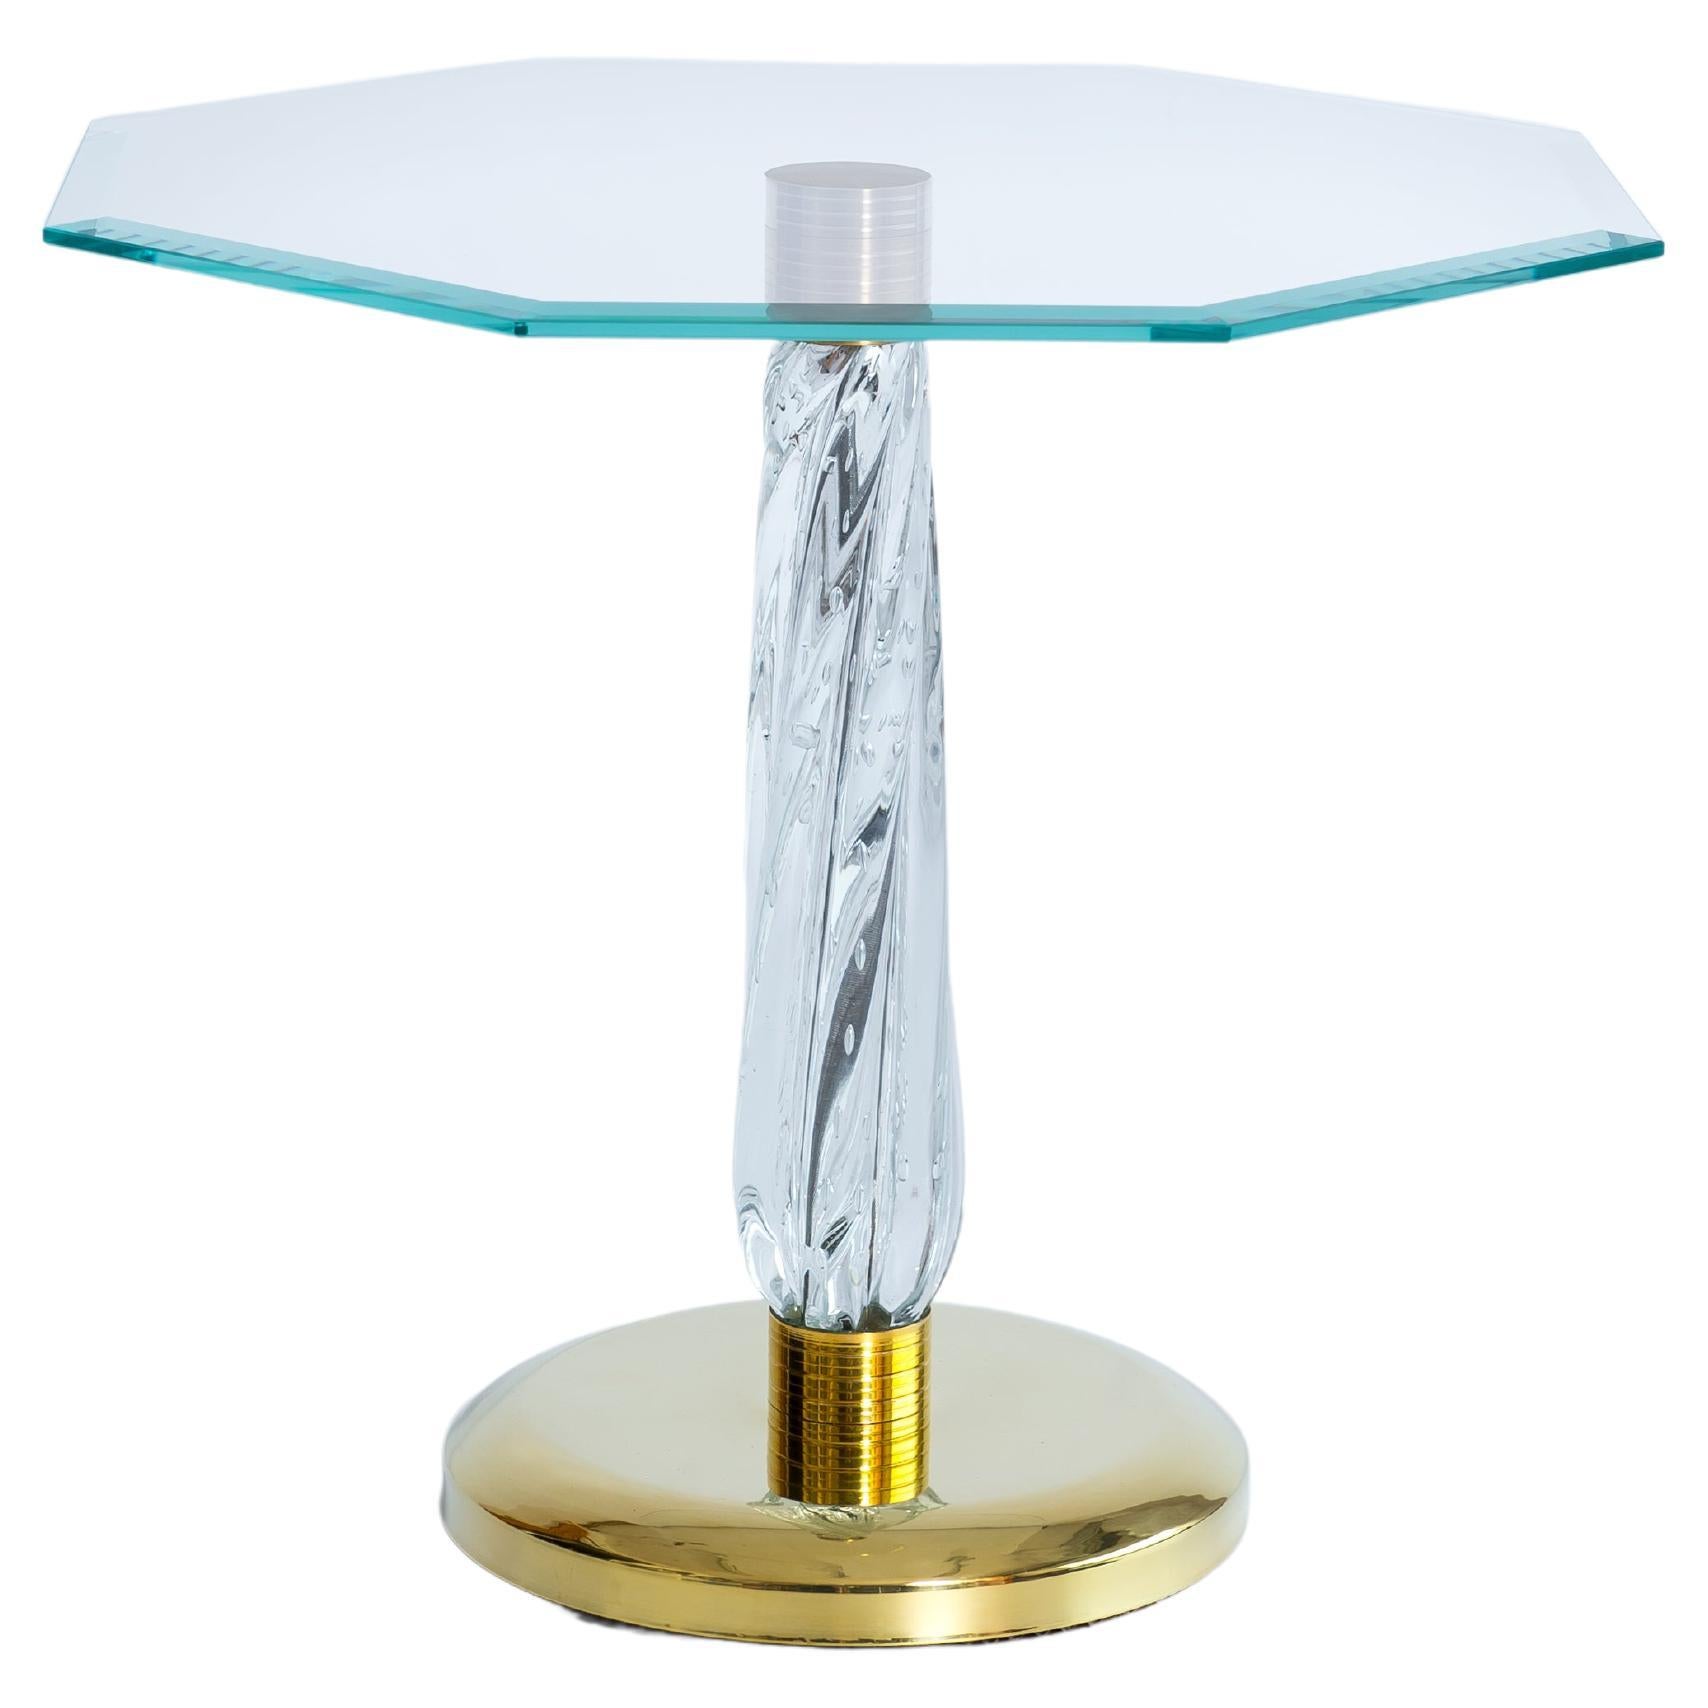 Gorgeous Venetian Cocktail Table in Murano Glass with Bronze Base, 21st Century